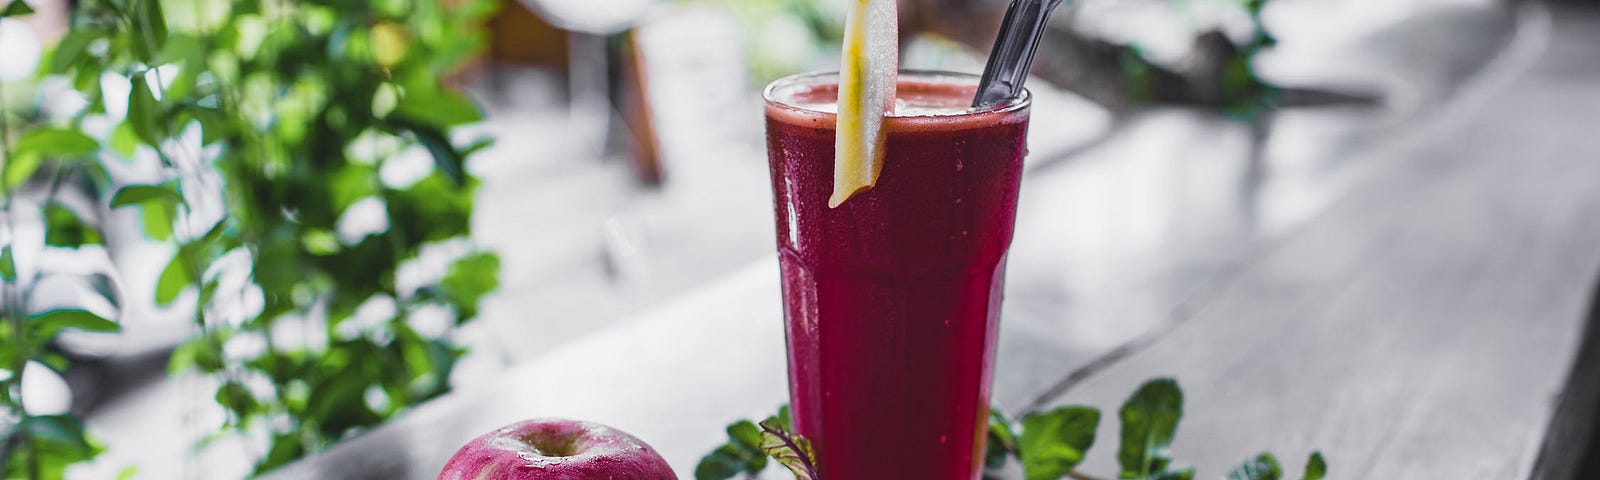 Glass of beetroot juice with an apple and beetroot on the side